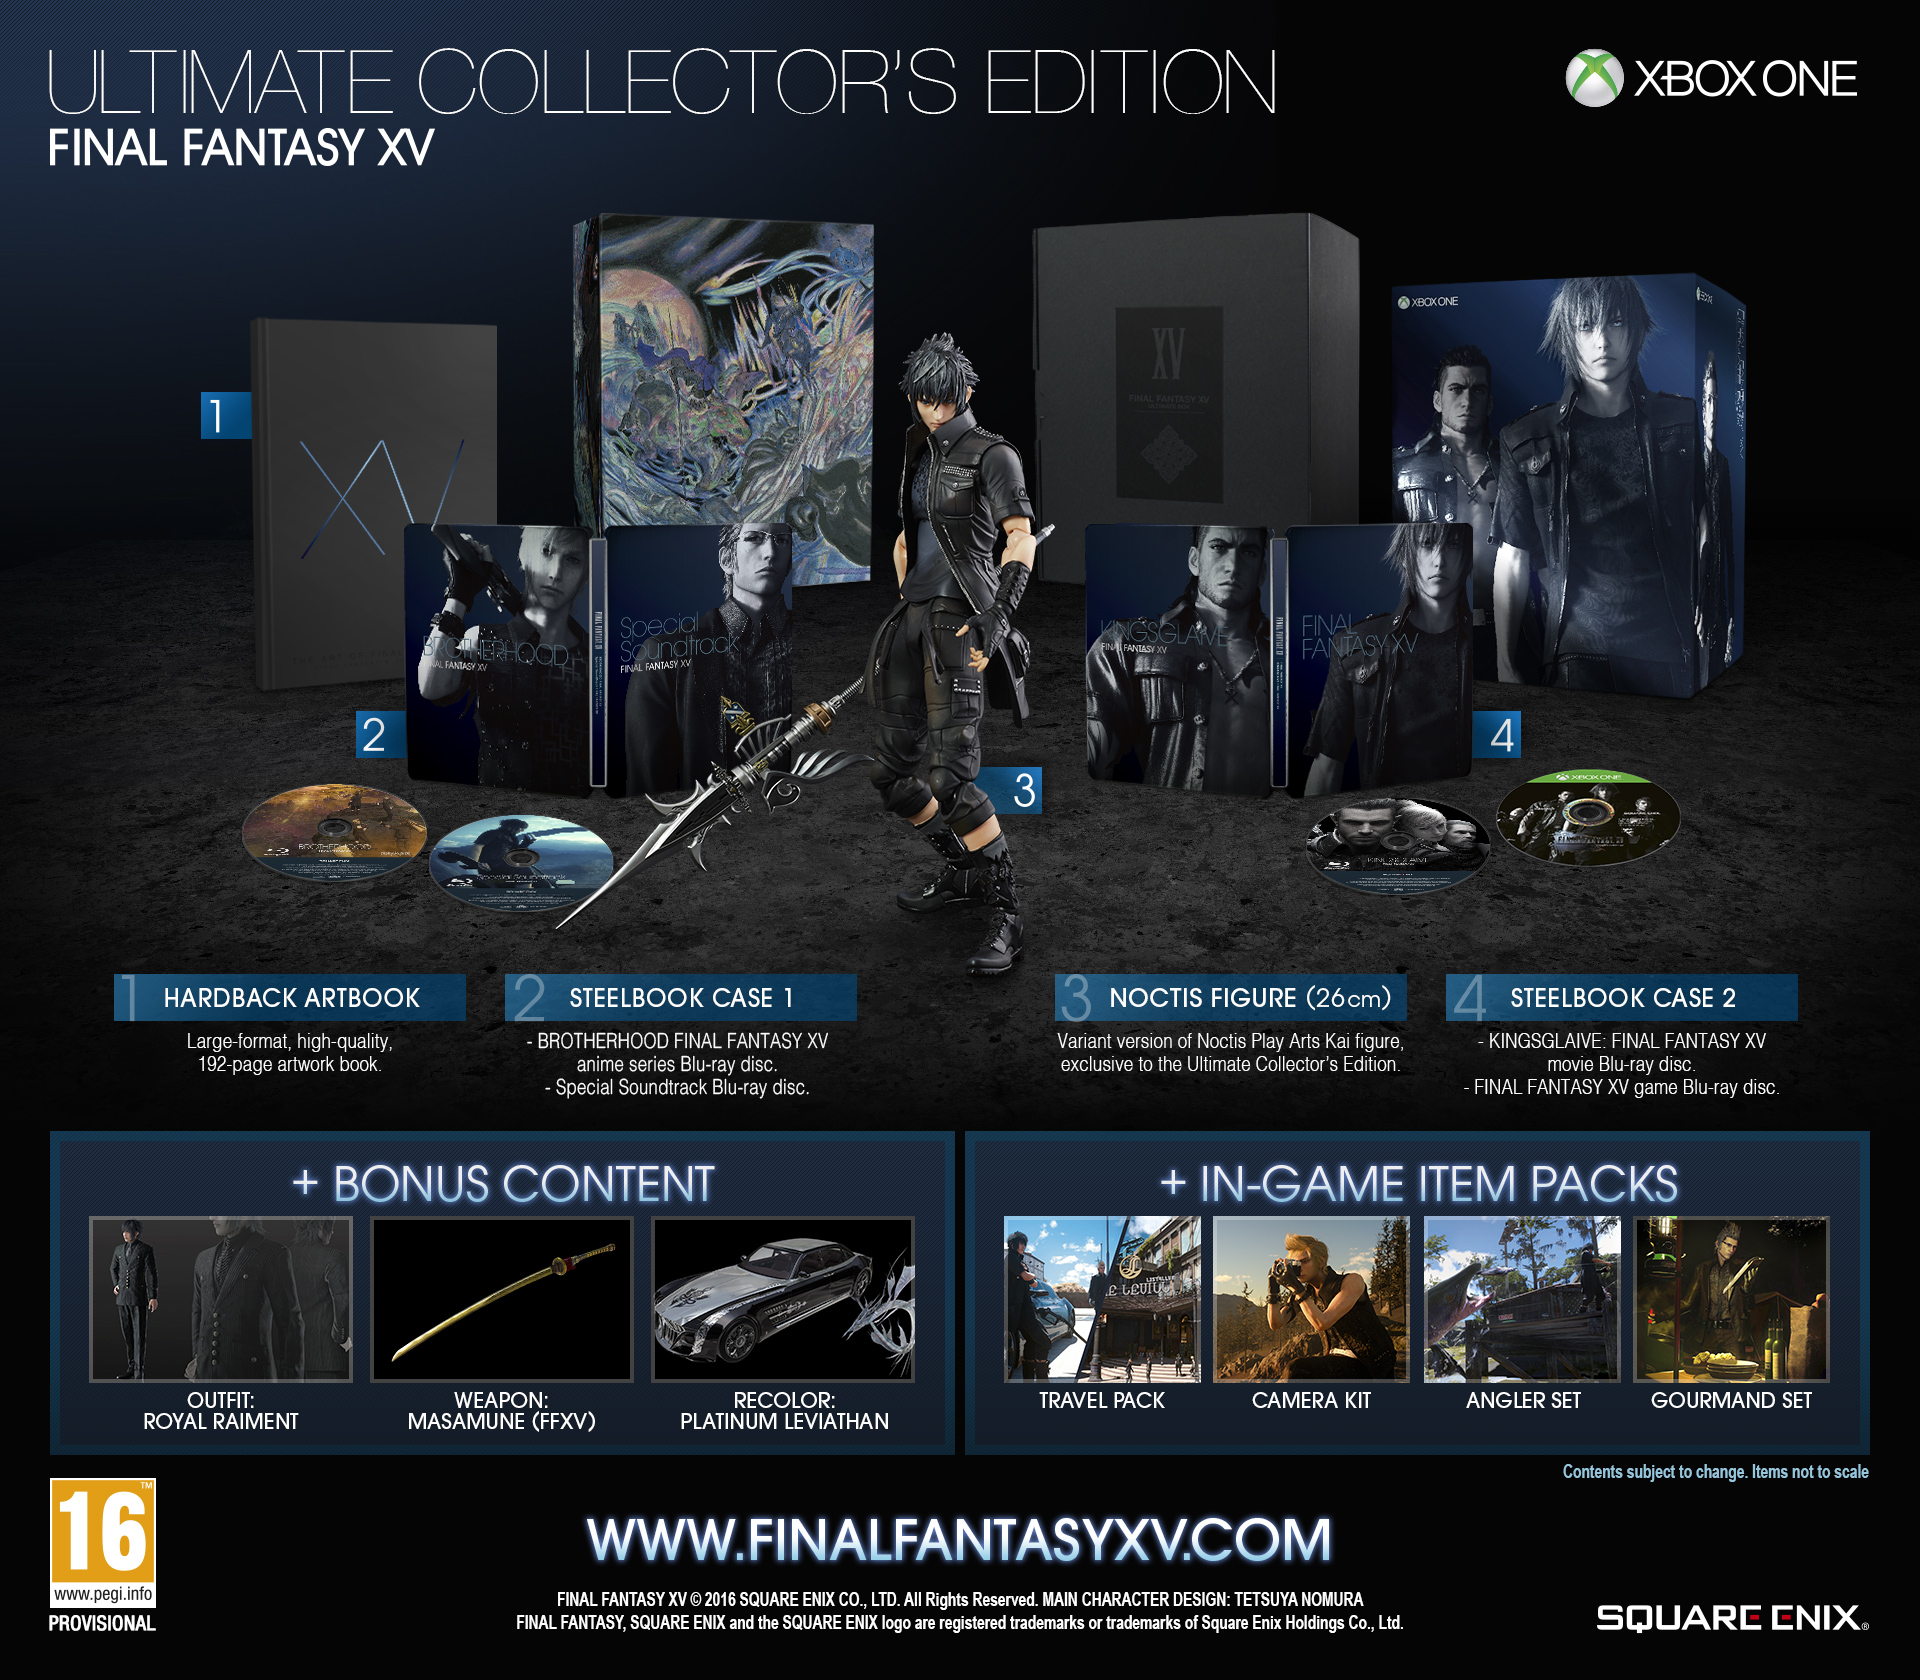 Final Fantasy XV Deluxe and Ultimate Collector's Edition revealed 